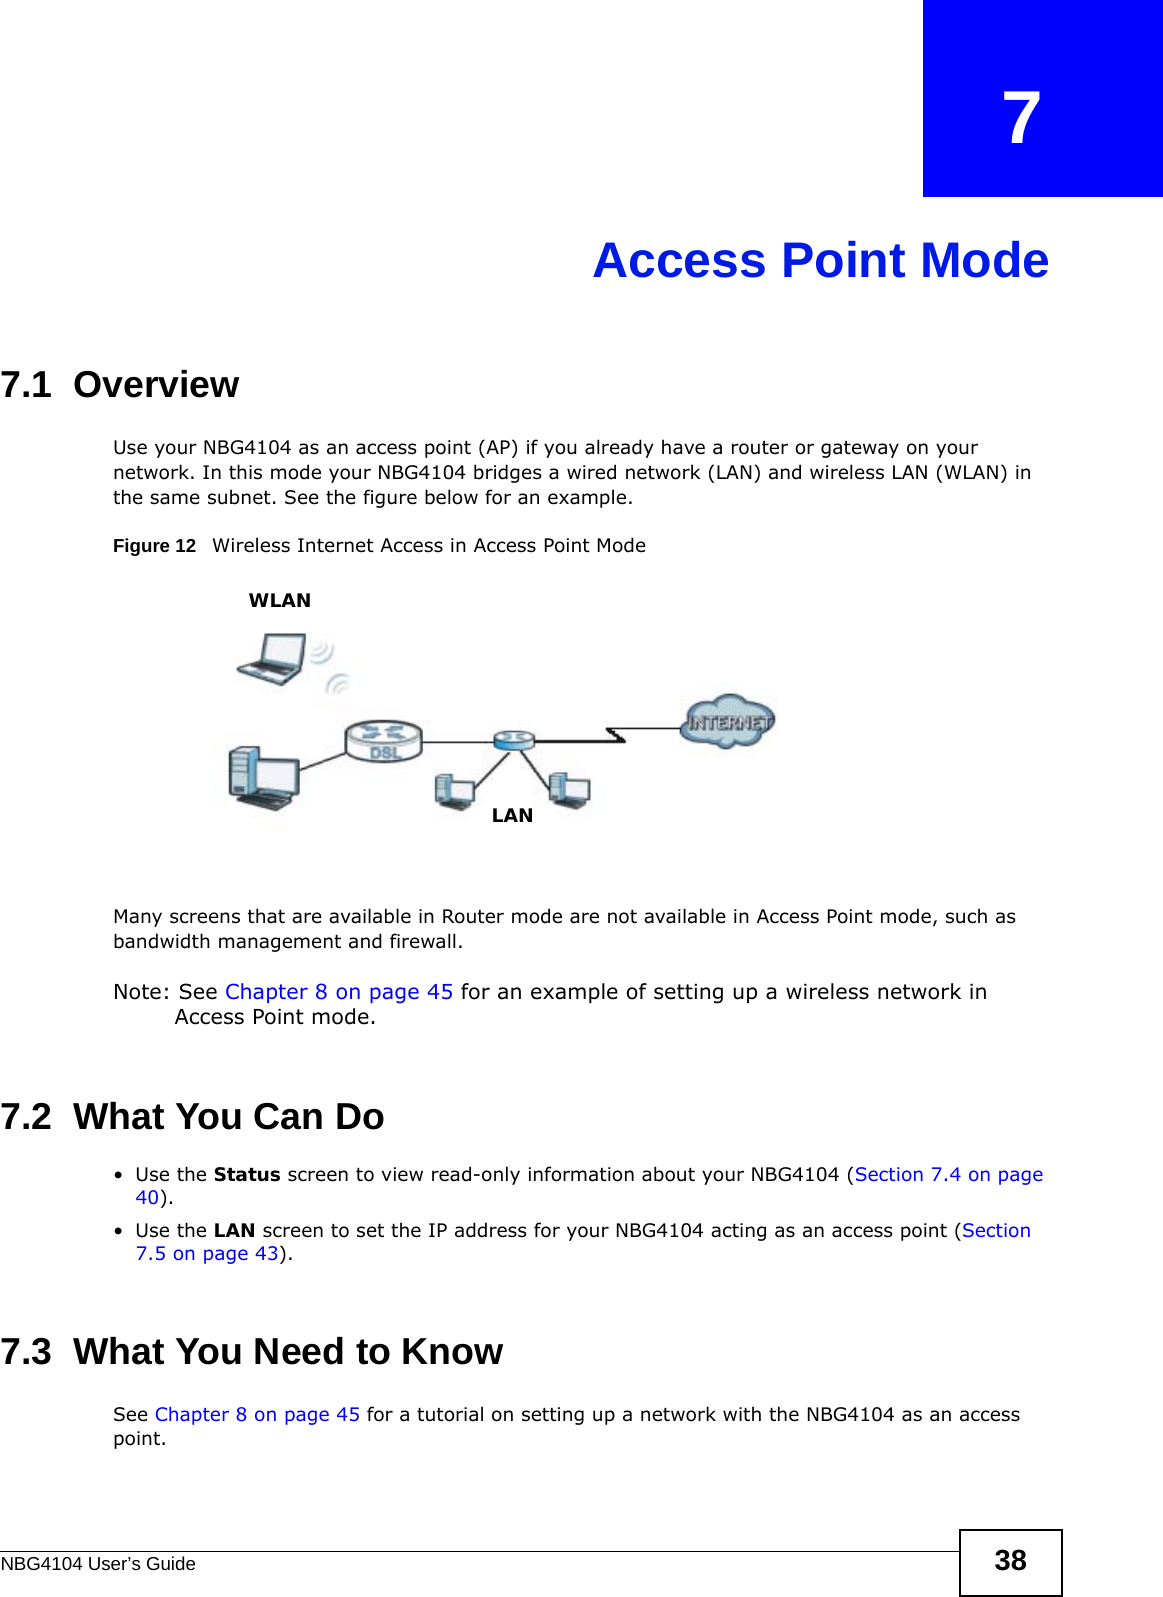 NBG4104 User’s Guide 38CHAPTER   7Access Point Mode7.1  OverviewUse your NBG4104 as an access point (AP) if you already have a router or gateway on your network. In this mode your NBG4104 bridges a wired network (LAN) and wireless LAN (WLAN) in the same subnet. See the figure below for an example.Figure 12   Wireless Internet Access in Access Point Mode Many screens that are available in Router mode are not available in Access Point mode, such as bandwidth management and firewall.Note: See Chapter 8 on page 45 for an example of setting up a wireless network in Access Point mode. 7.2  What You Can Do•Use the Status screen to view read-only information about your NBG4104 (Section 7.4 on page 40).•Use the LAN screen to set the IP address for your NBG4104 acting as an access point (Section 7.5 on page 43).7.3  What You Need to KnowSee Chapter 8 on page 45 for a tutorial on setting up a network with the NBG4104 as an access point.WLANLAN